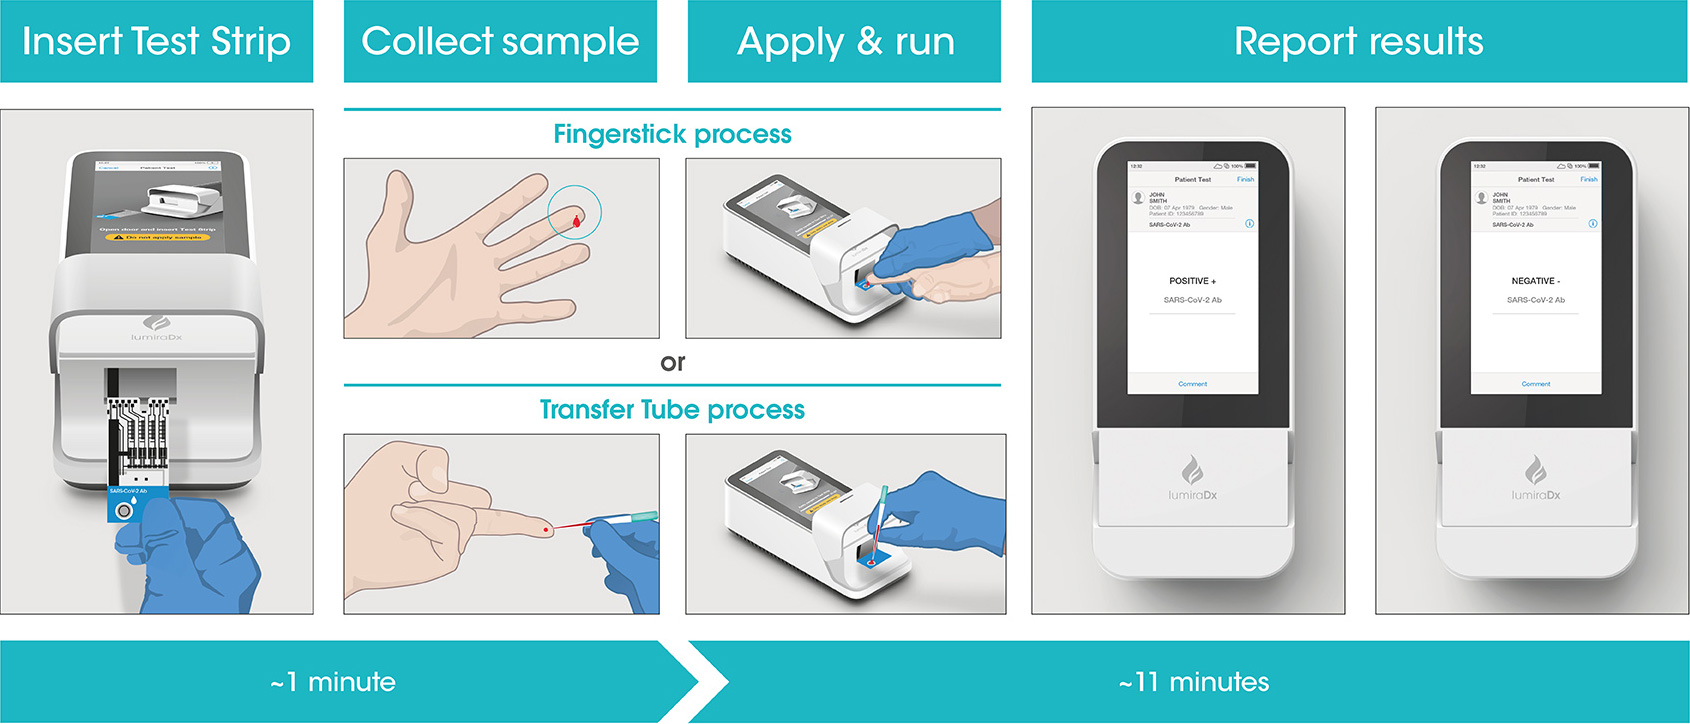 The LumiraDx SARS-CoV-2 Ab Test workflow process is comprised of a simple sample collection with a fingerstick lancet followed by step-by-step guidance of the Instrument to report a patient result in 11 minutes from sample application.